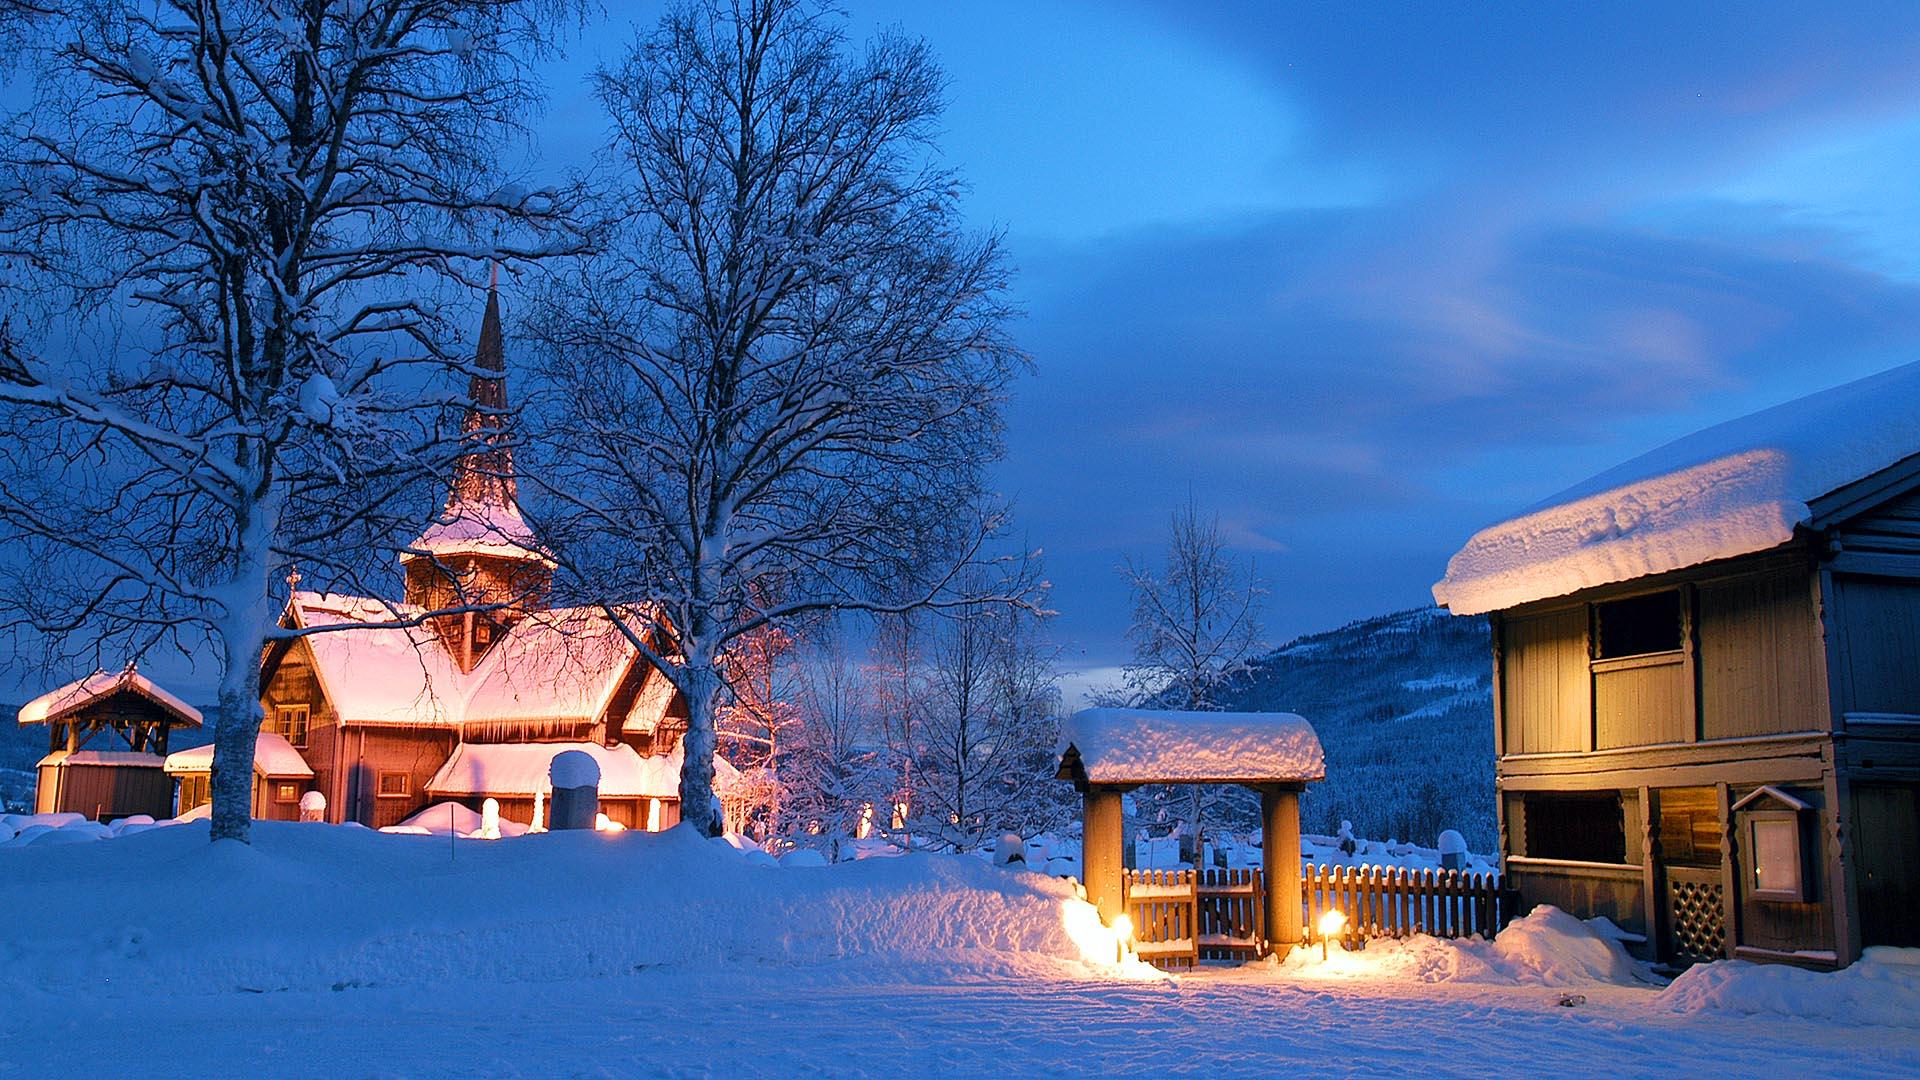 A snowy day in the blue hours, a stave church in the background and an old wooden building in the foreground.